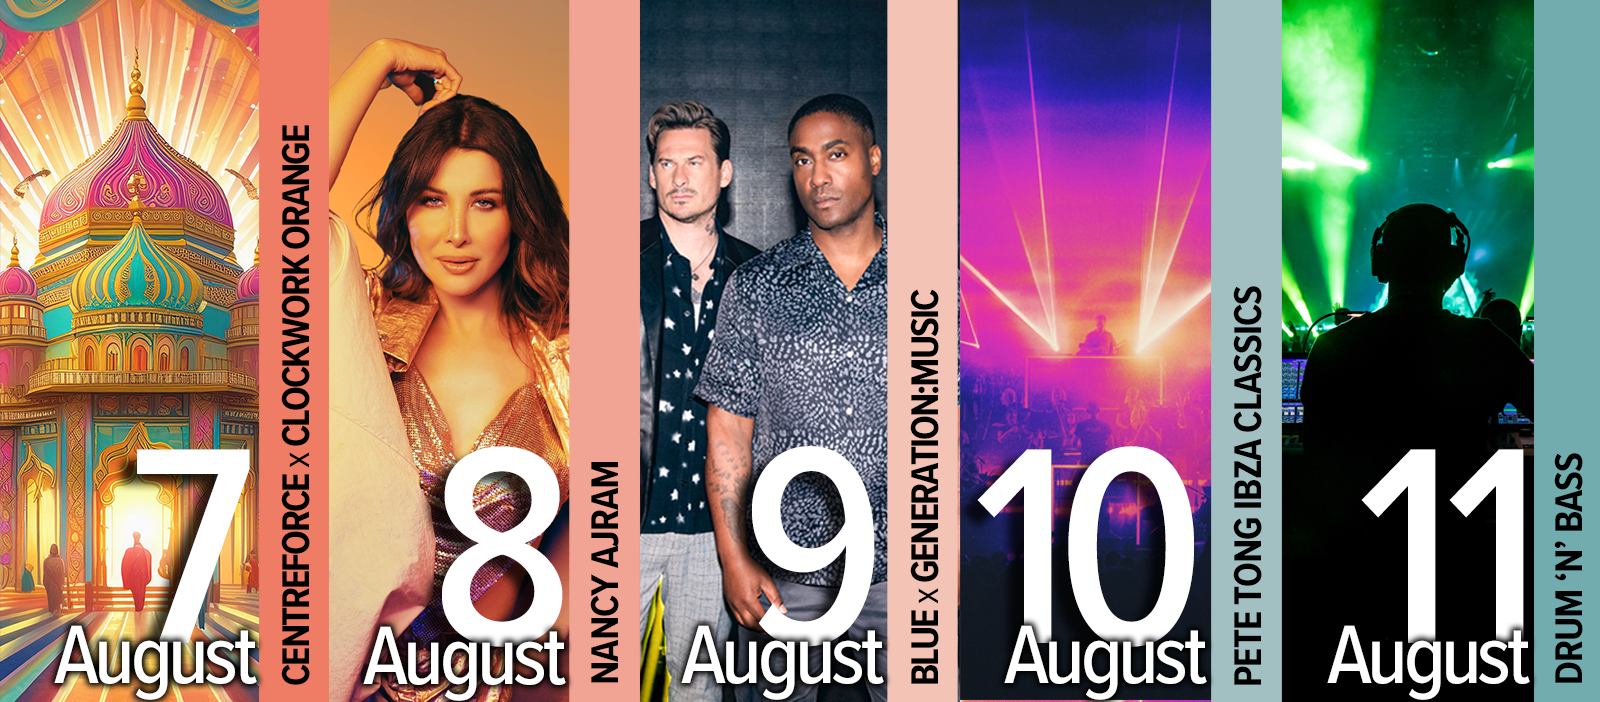 FIESTA Marbella reveals their full line-up of acts and charity partners